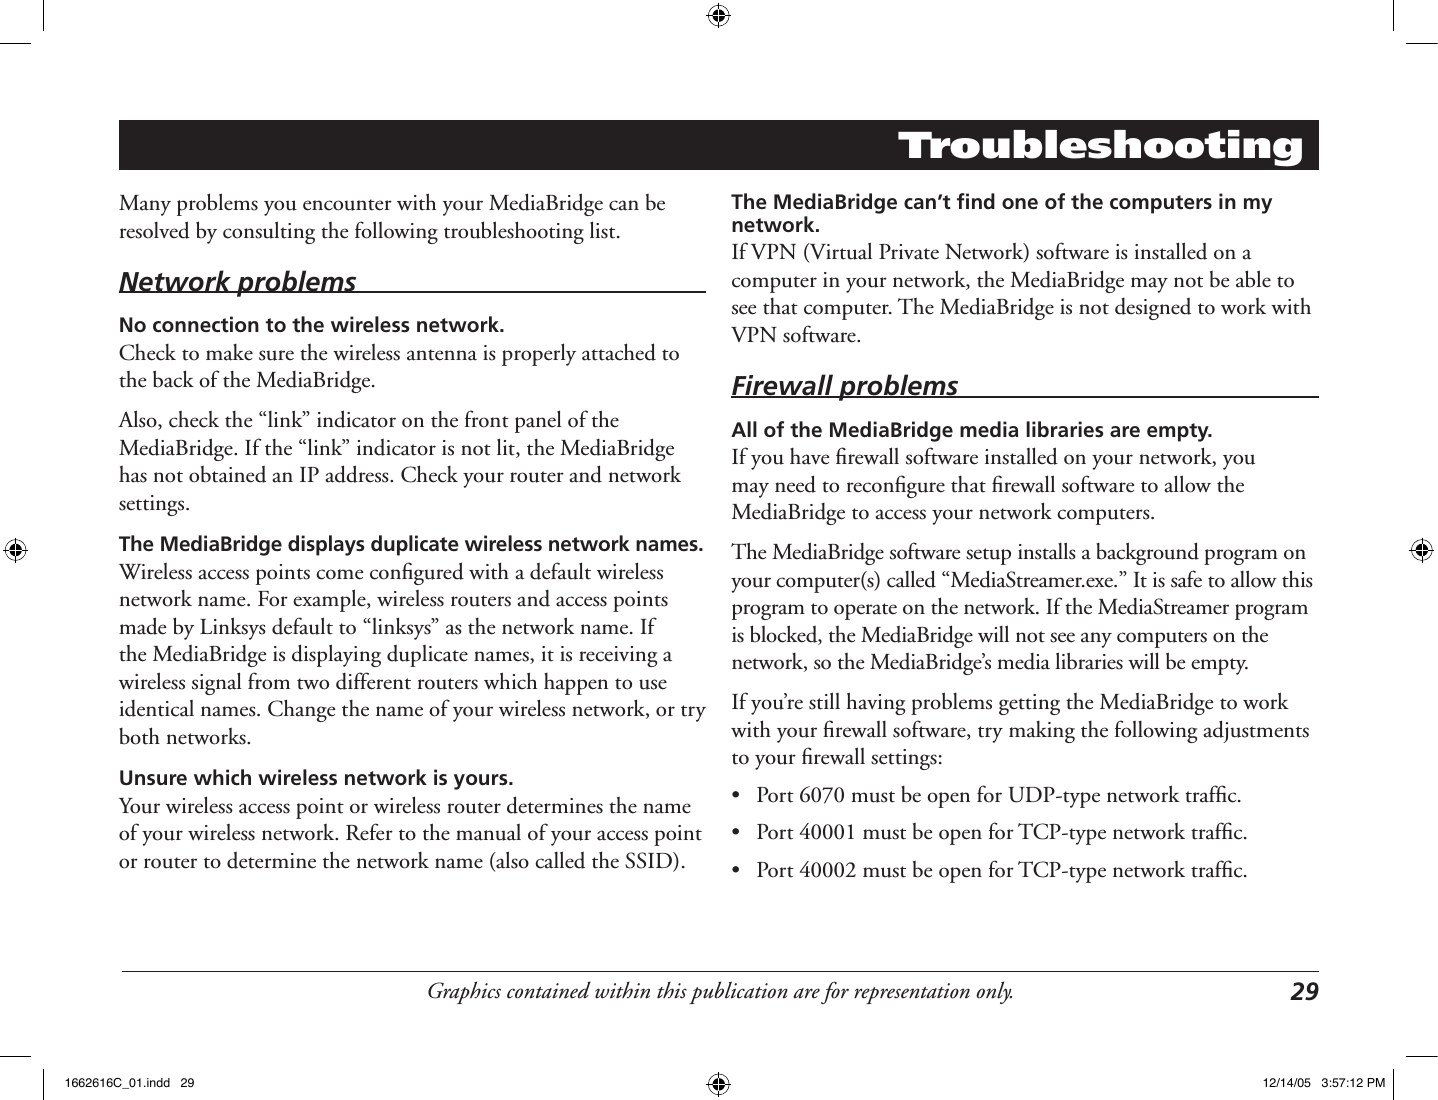 Graphics contained within this publication are for representation only. 29TroubleshootingMany problems you encounter with your MediaBridge can be resolved by consulting the following troubleshooting list.Network problemsNo connection to the wireless network.Check to make sure the wireless antenna is properly attached to the back of the MediaBridge.Also, check the “link” indicator on the front panel of the MediaBridge. If the “link” indicator is not lit, the MediaBridge has not obtained an IP address. Check your router and network settings.The MediaBridge displays duplicate wireless network names.Wireless access points come conﬁgured with a default wireless network name. For example, wireless routers and access points made by Linksys default to “linksys” as the network name. If the MediaBridge is displaying duplicate names, it is receiving a wireless signal from two different routers which happen to use identical names. Change the name of your wireless network, or try both networks.Unsure which wireless network is yours.Your wireless access point or wireless router determines the name of your wireless network. Refer to the manual of your access point or router to determine the network name (also called the SSID).The MediaBridge can’t ﬁnd one of the computers in my network.If VPN (Virtual Private Network) software is installed on a computer in your network, the MediaBridge may not be able to see that computer. The MediaBridge is not designed to work with VPN software.Firewall problemsAll of the MediaBridge media libraries are empty.If you have ﬁrewall software installed on your network, you may need to reconﬁgure that ﬁrewall software to allow the MediaBridge to access your network computers. The MediaBridge software setup installs a background program on your computer(s) called “MediaStreamer.exe.” It is safe to allow this program to operate on the network. If the MediaStreamer program is blocked, the MediaBridge will not see any computers on the network, so the MediaBridge’s media libraries will be empty.If you’re still having problems getting the MediaBridge to work with your ﬁrewall software, try making the following adjustments to your ﬁrewall settings:•  Port 6070 must be open for UDP-type network trafﬁc.•  Port 40001 must be open for TCP-type network trafﬁc.•  Port 40002 must be open for TCP-type network trafﬁc.1662616C_01.indd   29 12/14/05   3:57:12 PM